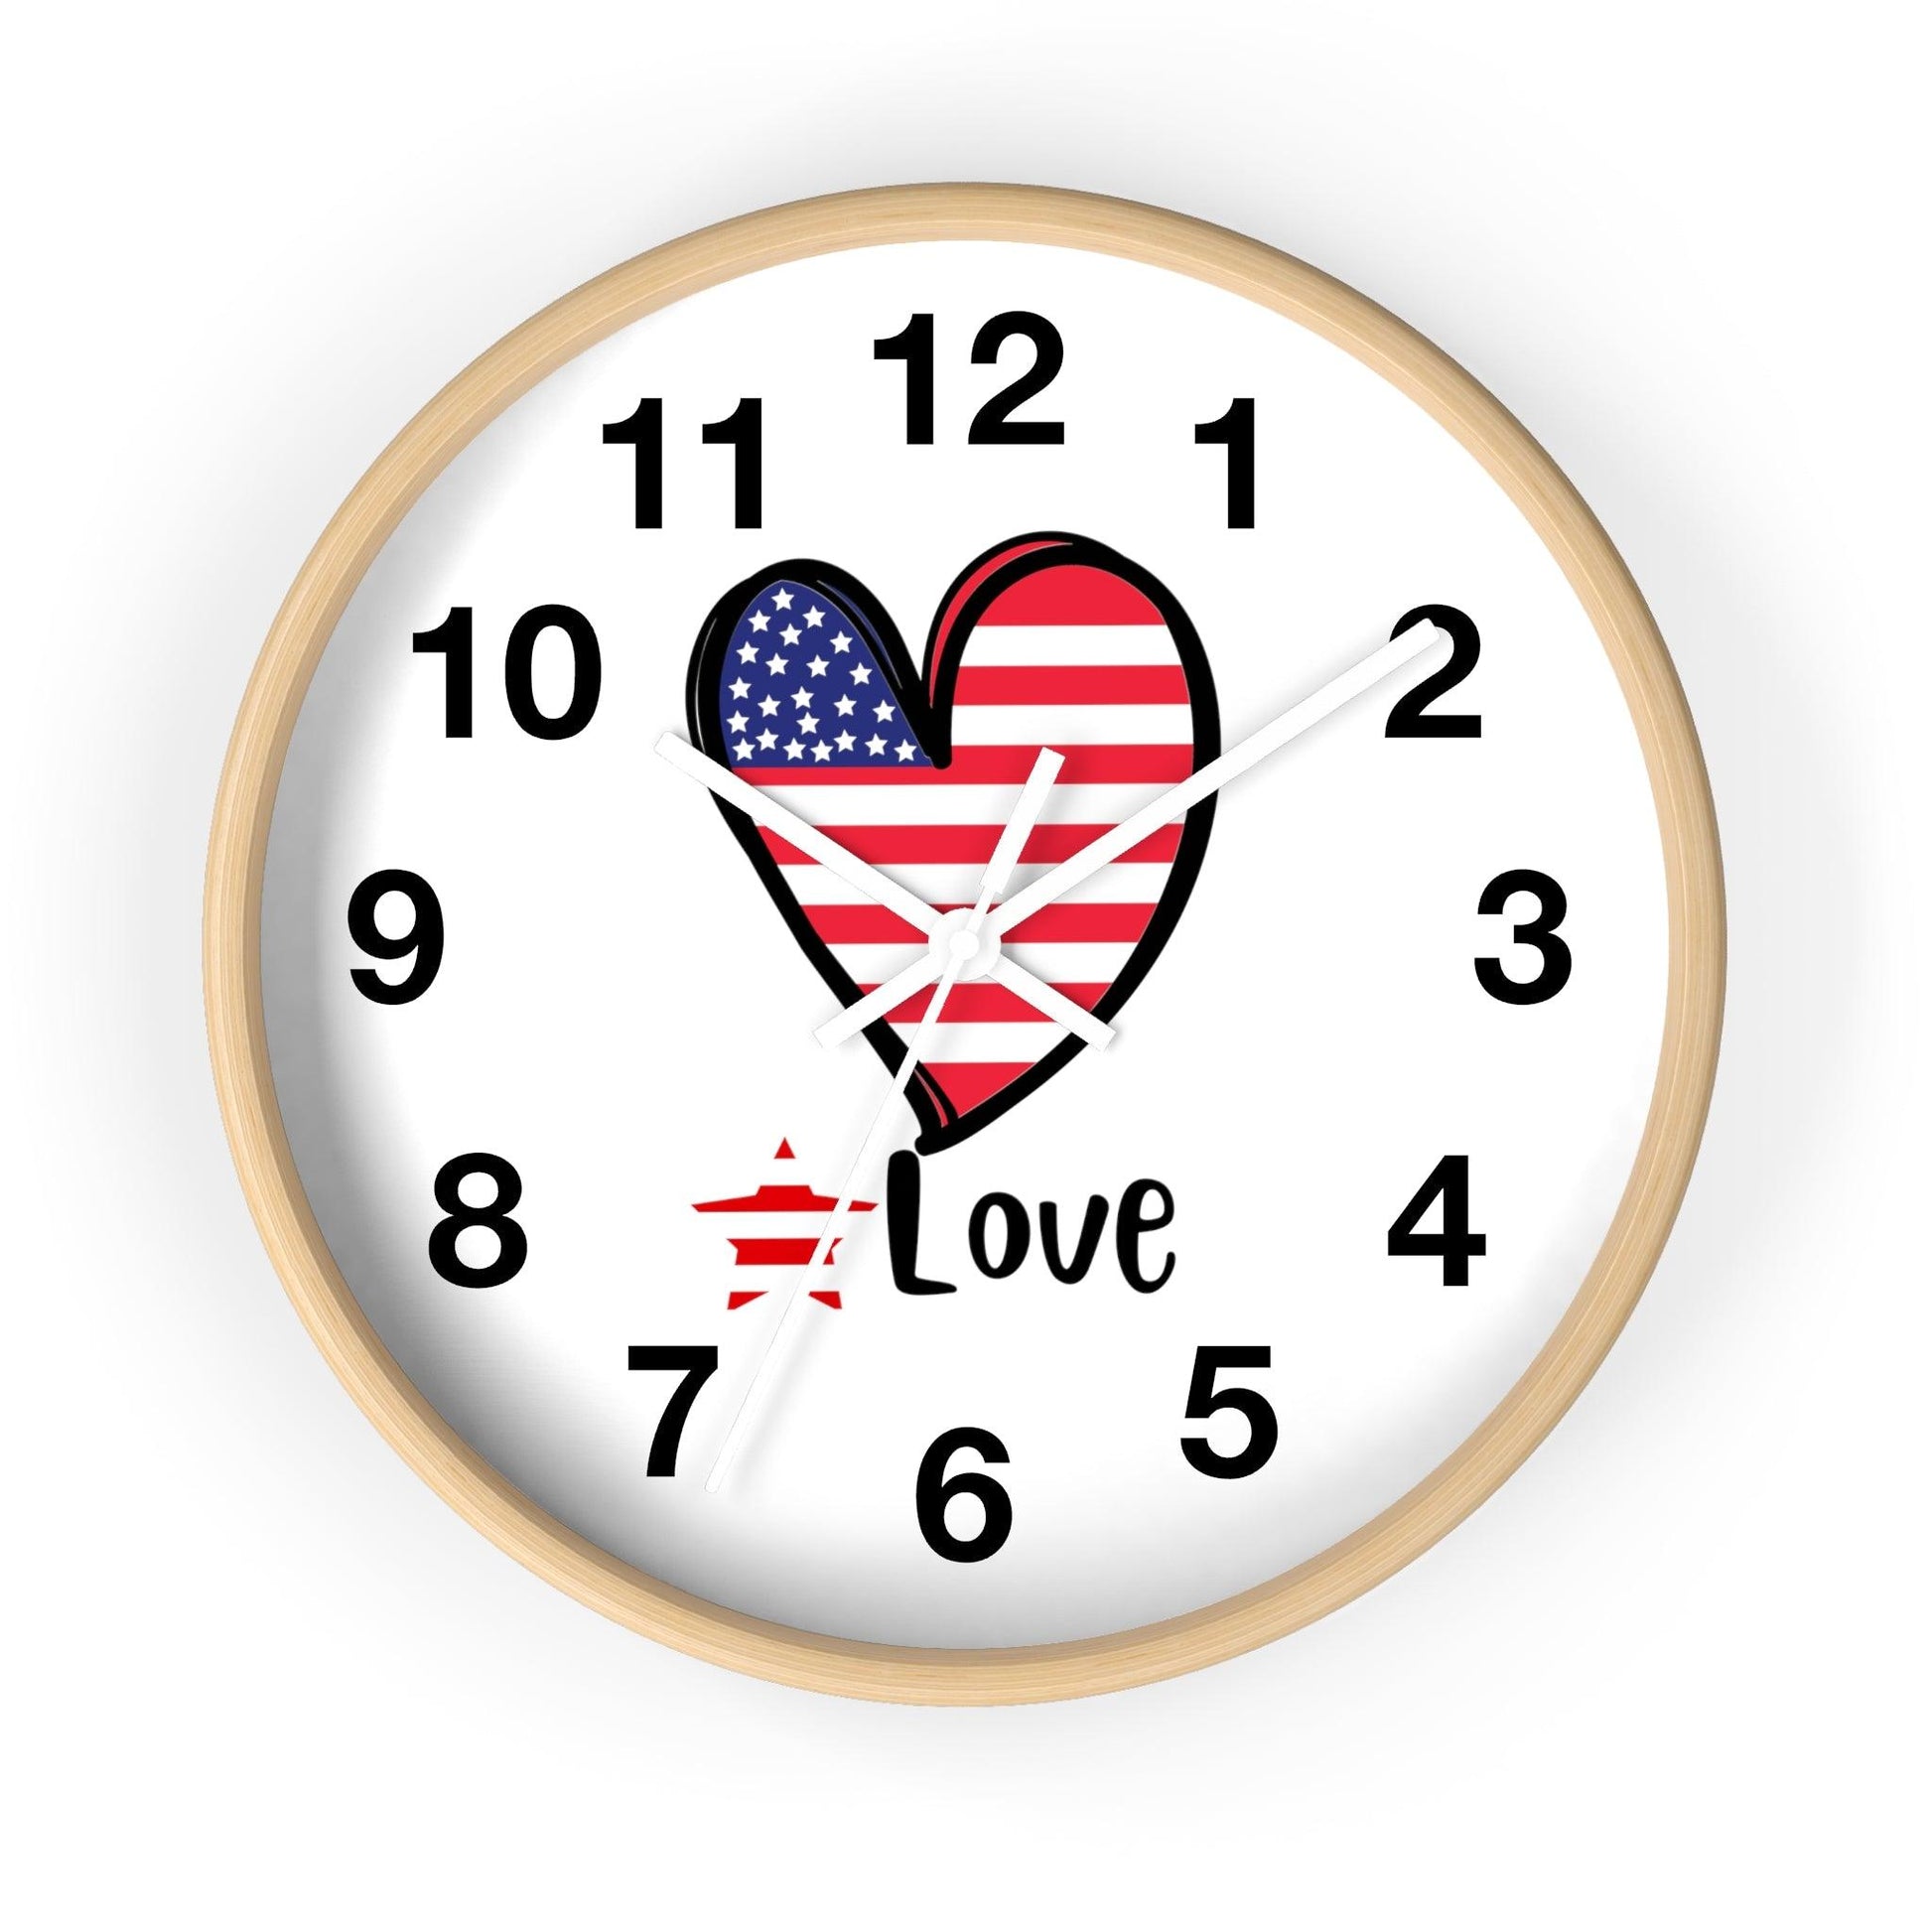 USA Flag Wall Clock, Home Decor gift, House Warming Gift, New Home Gift, Patriotic Gift for Americans Office Clock School Clock Home Clock - Giftsmojo